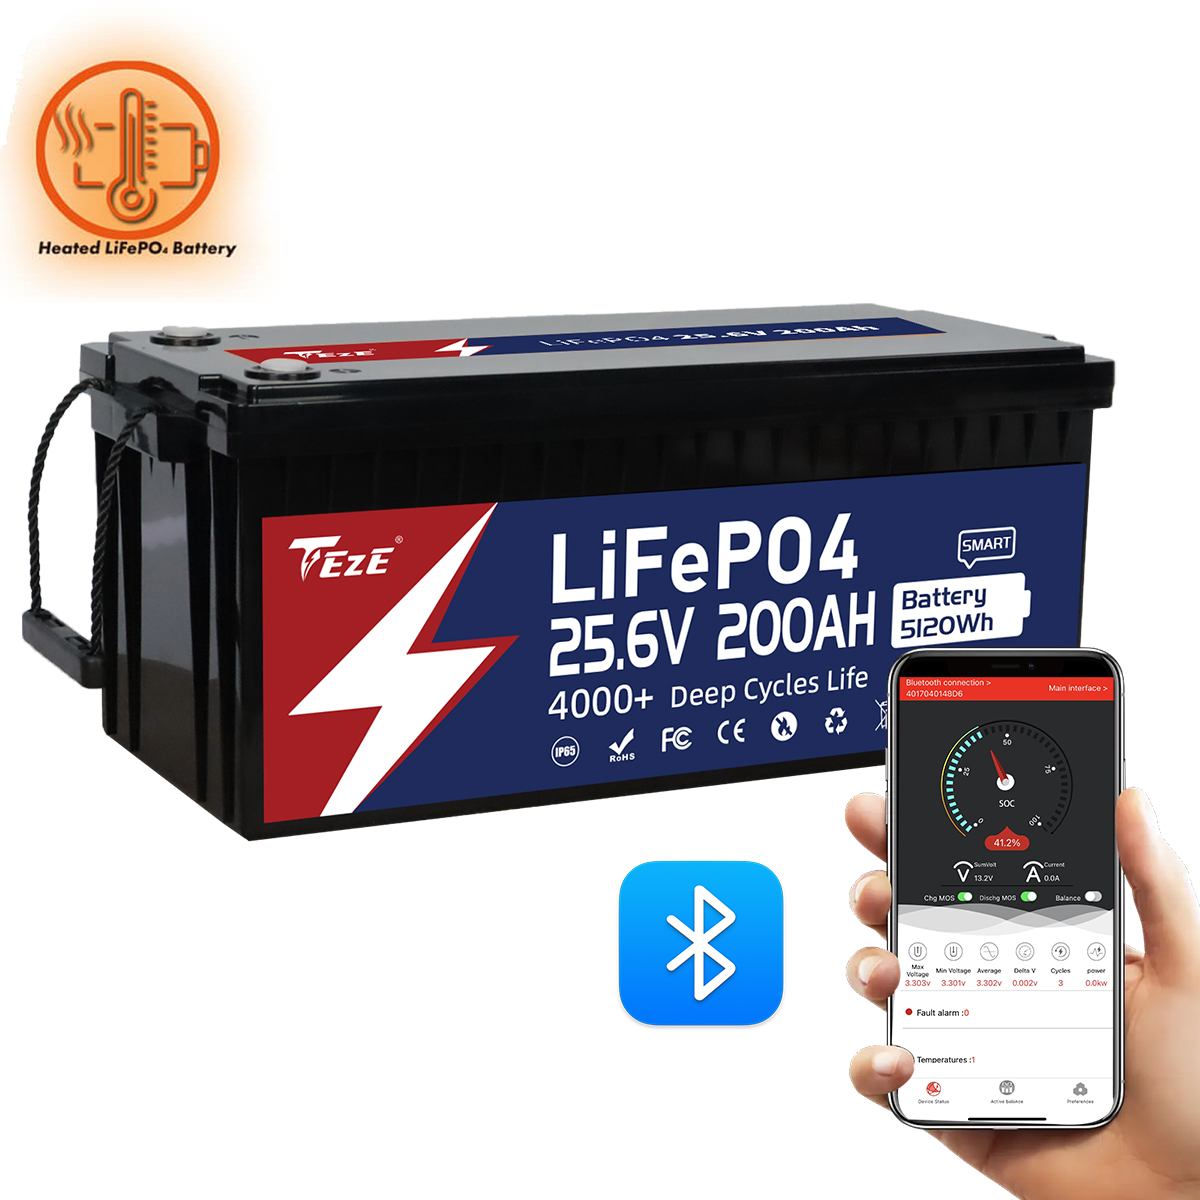 TezePower 24V 200Ah LiFePO4 Batterie with Bluetooth, Self-heating and Active Balancer, Built-in 200A Daly BMS(Bluetooth Built-in Version)